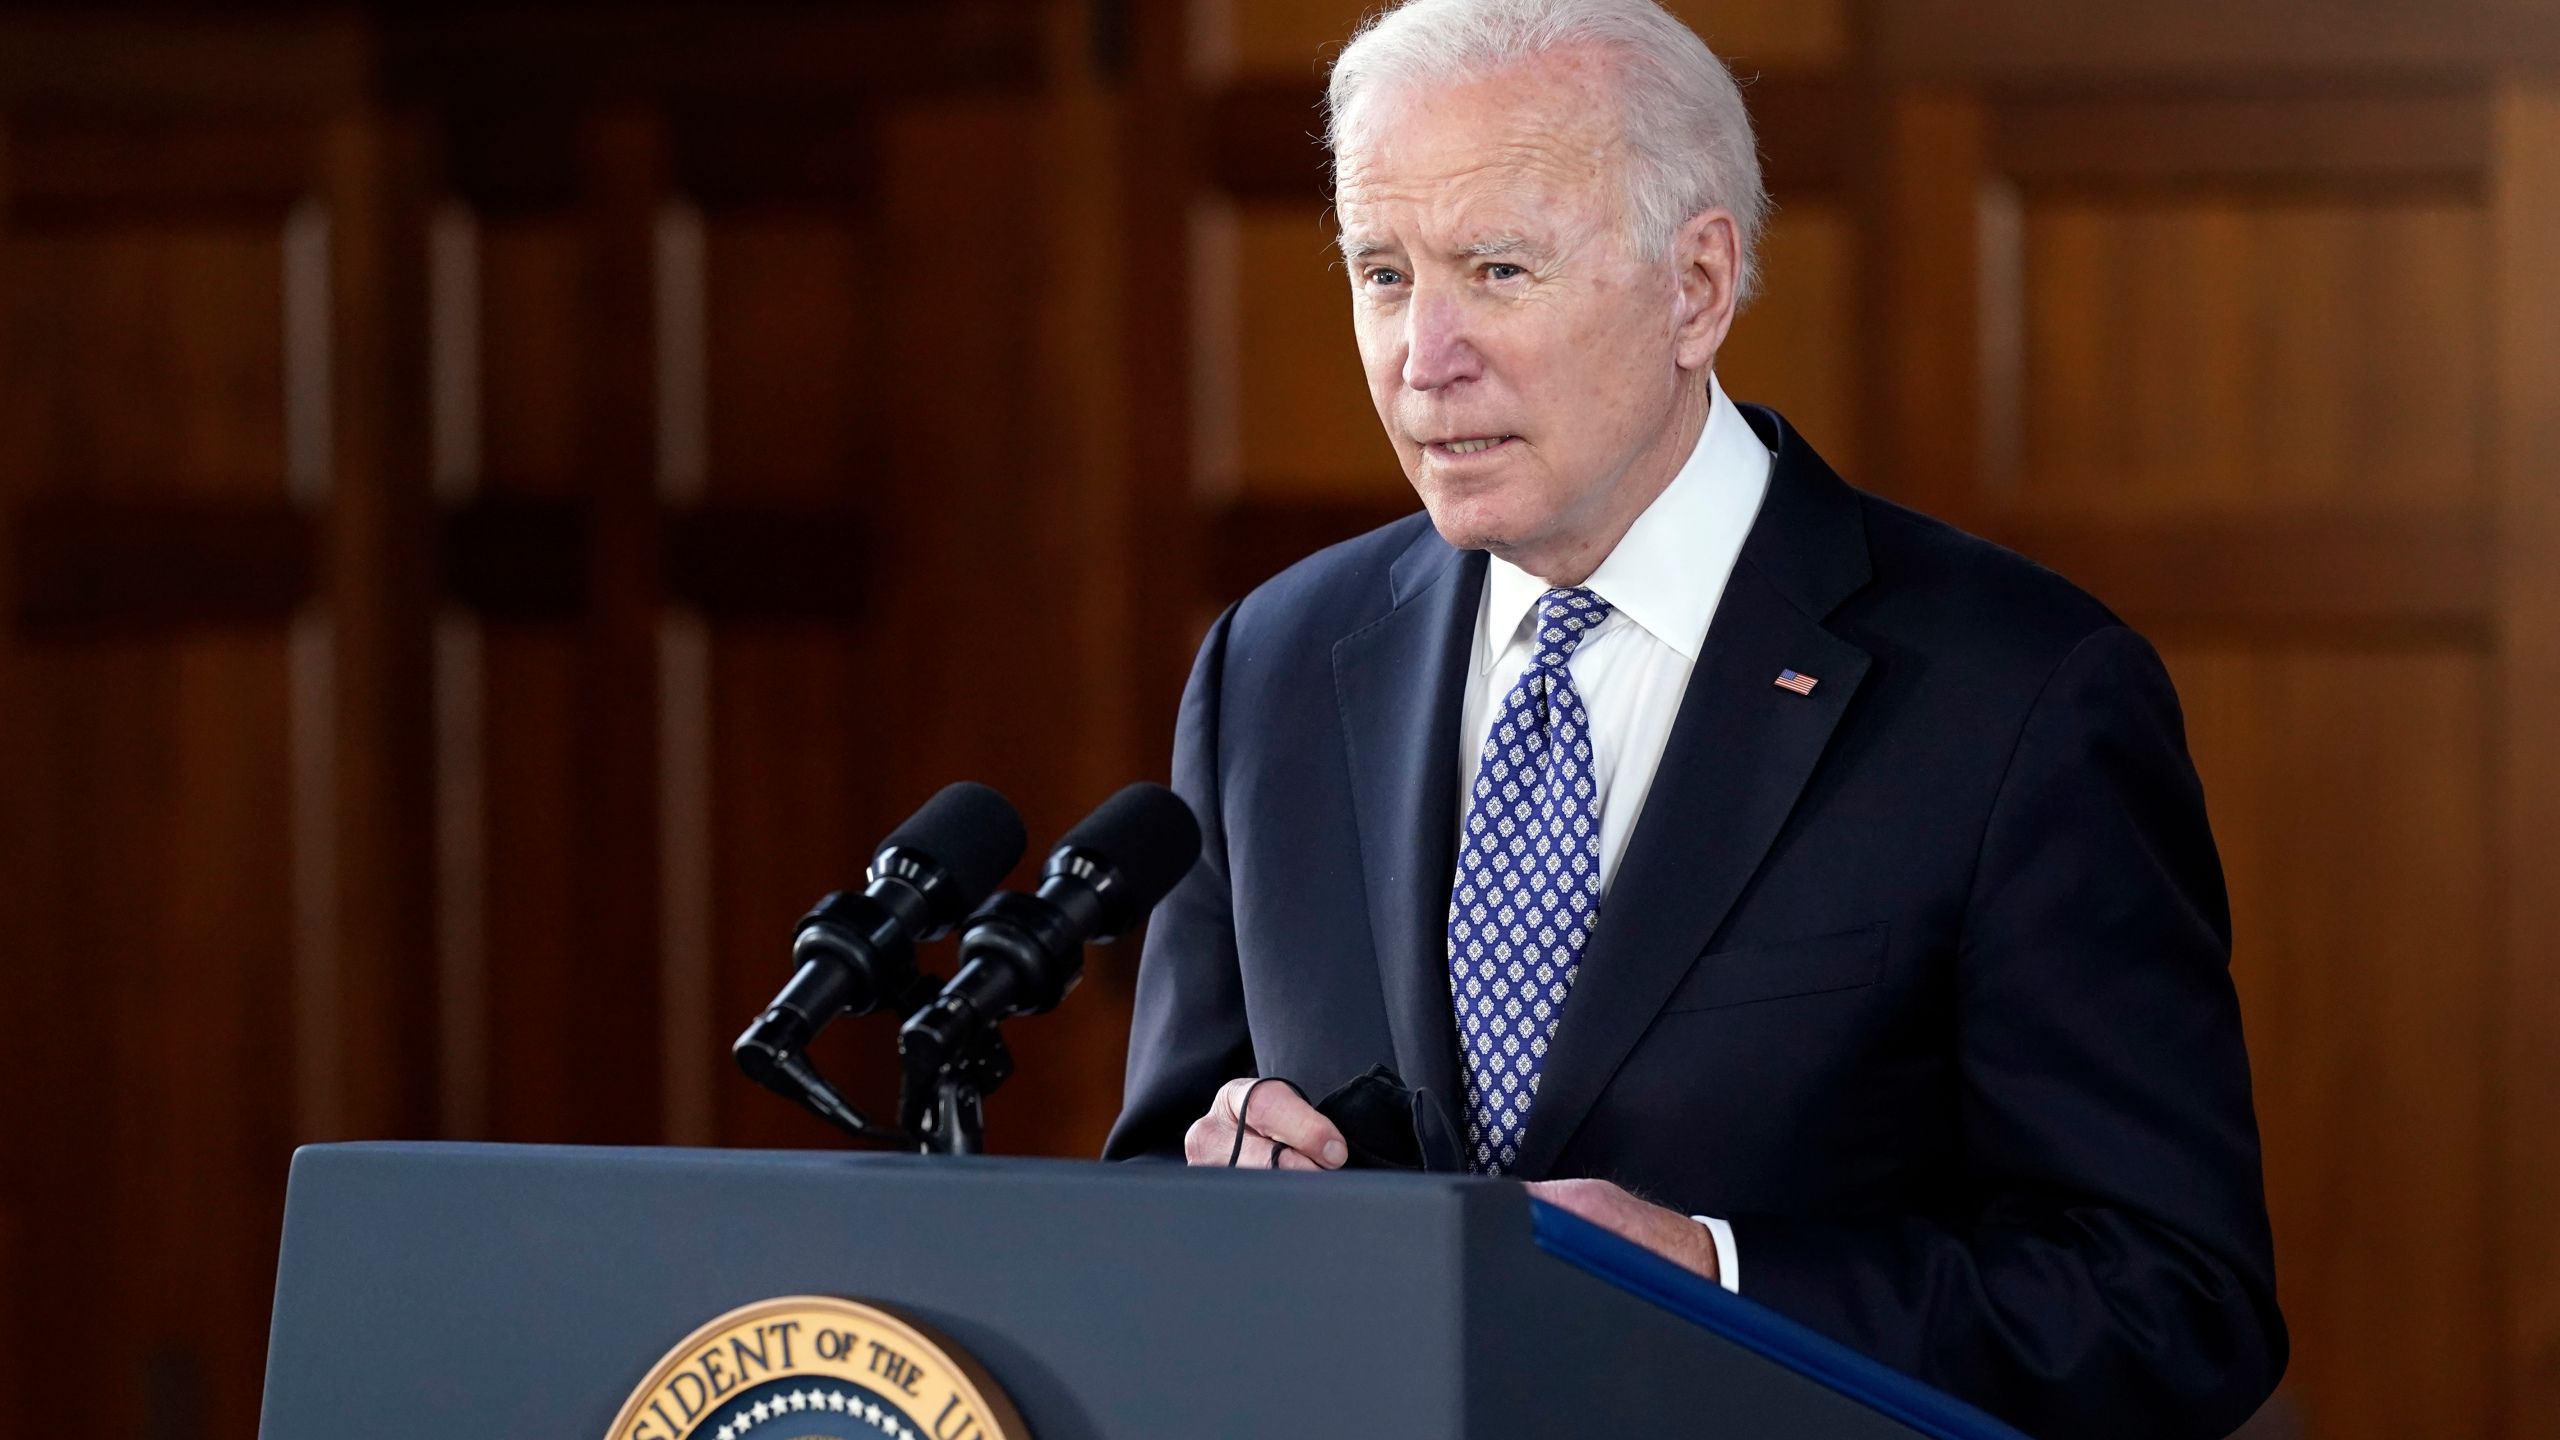 President Biden zones in on $3T package for infrastructure, domestic needs